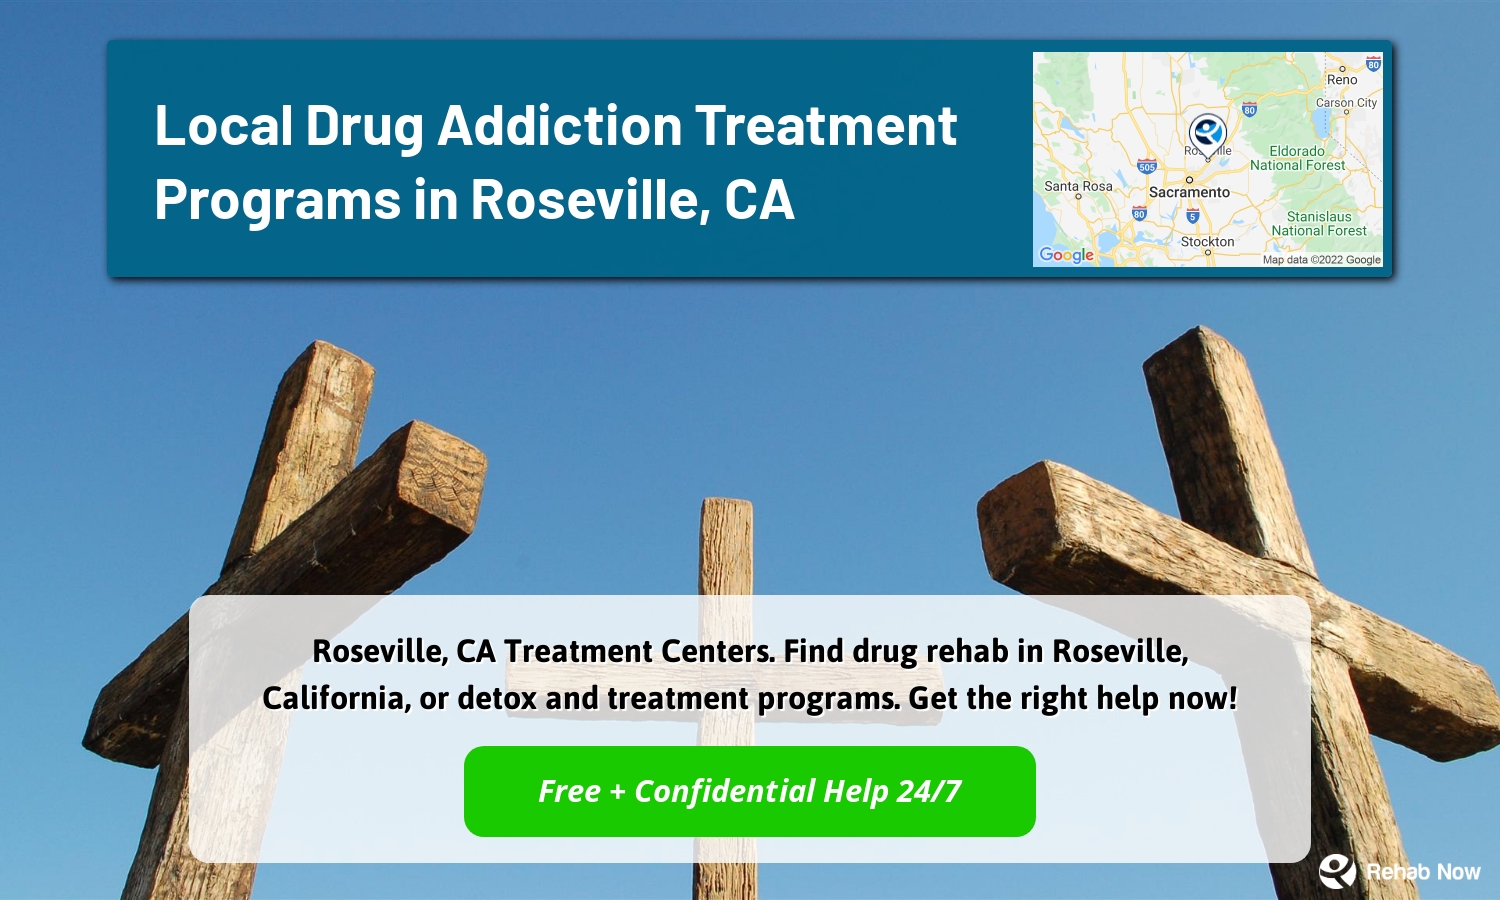 Roseville, CA Treatment Centers. Find drug rehab in Roseville, California, or detox and treatment programs. Get the right help now!